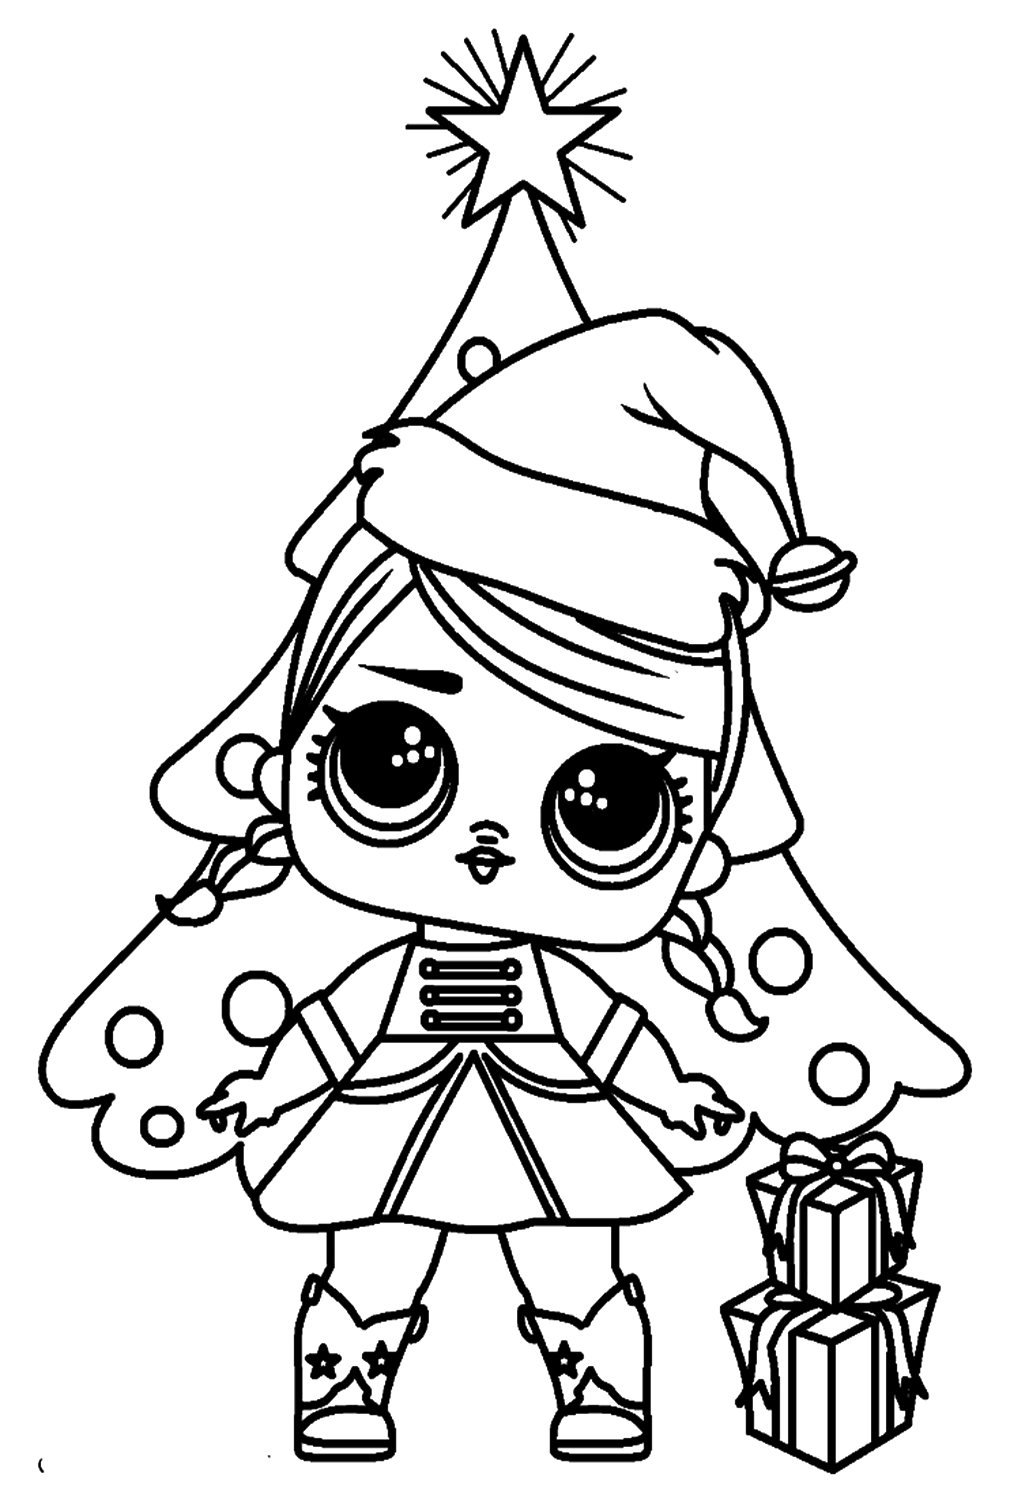 Lol Dolls Coloring Pages from Lol Surprise Doll